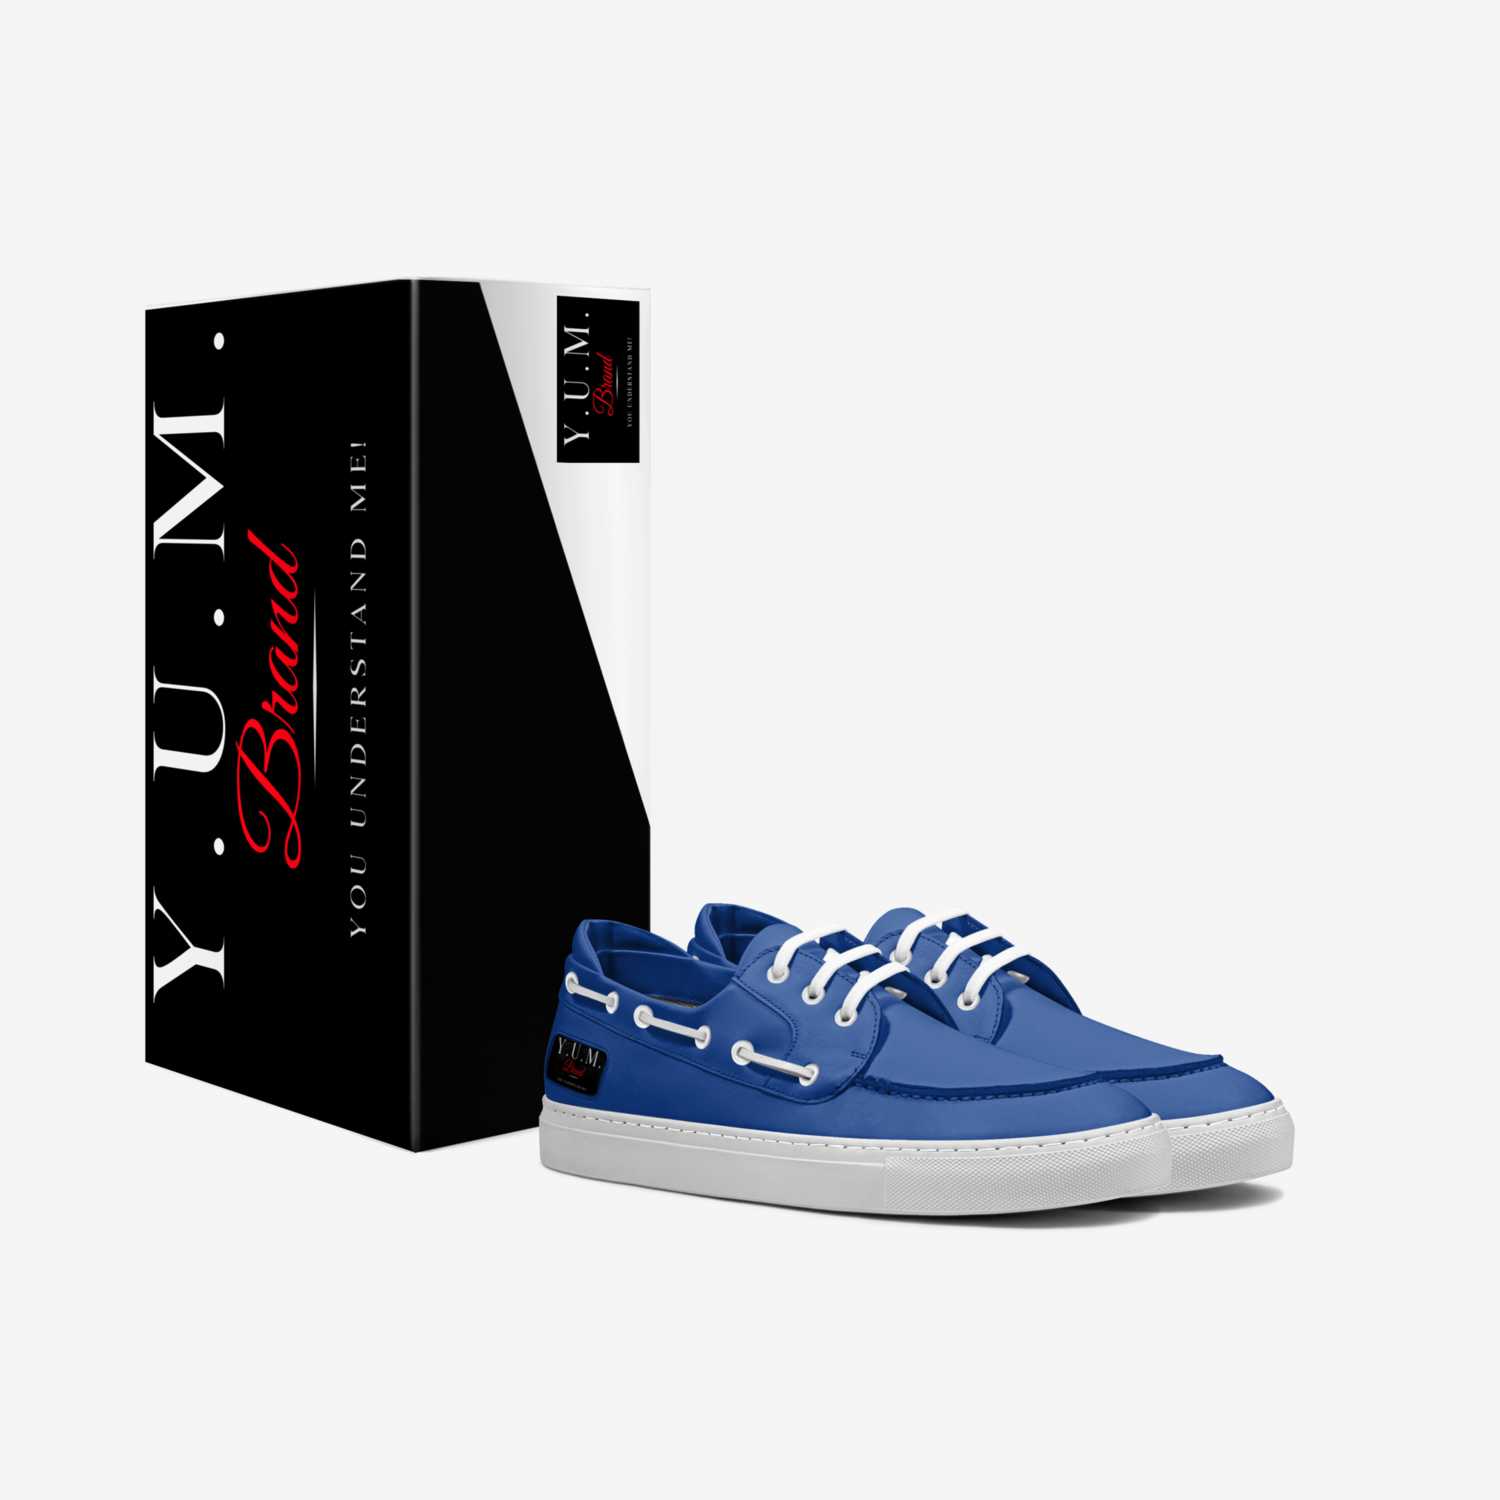 Y.U.M. Brand custom made in Italy shoes by Erick Walker | Box view